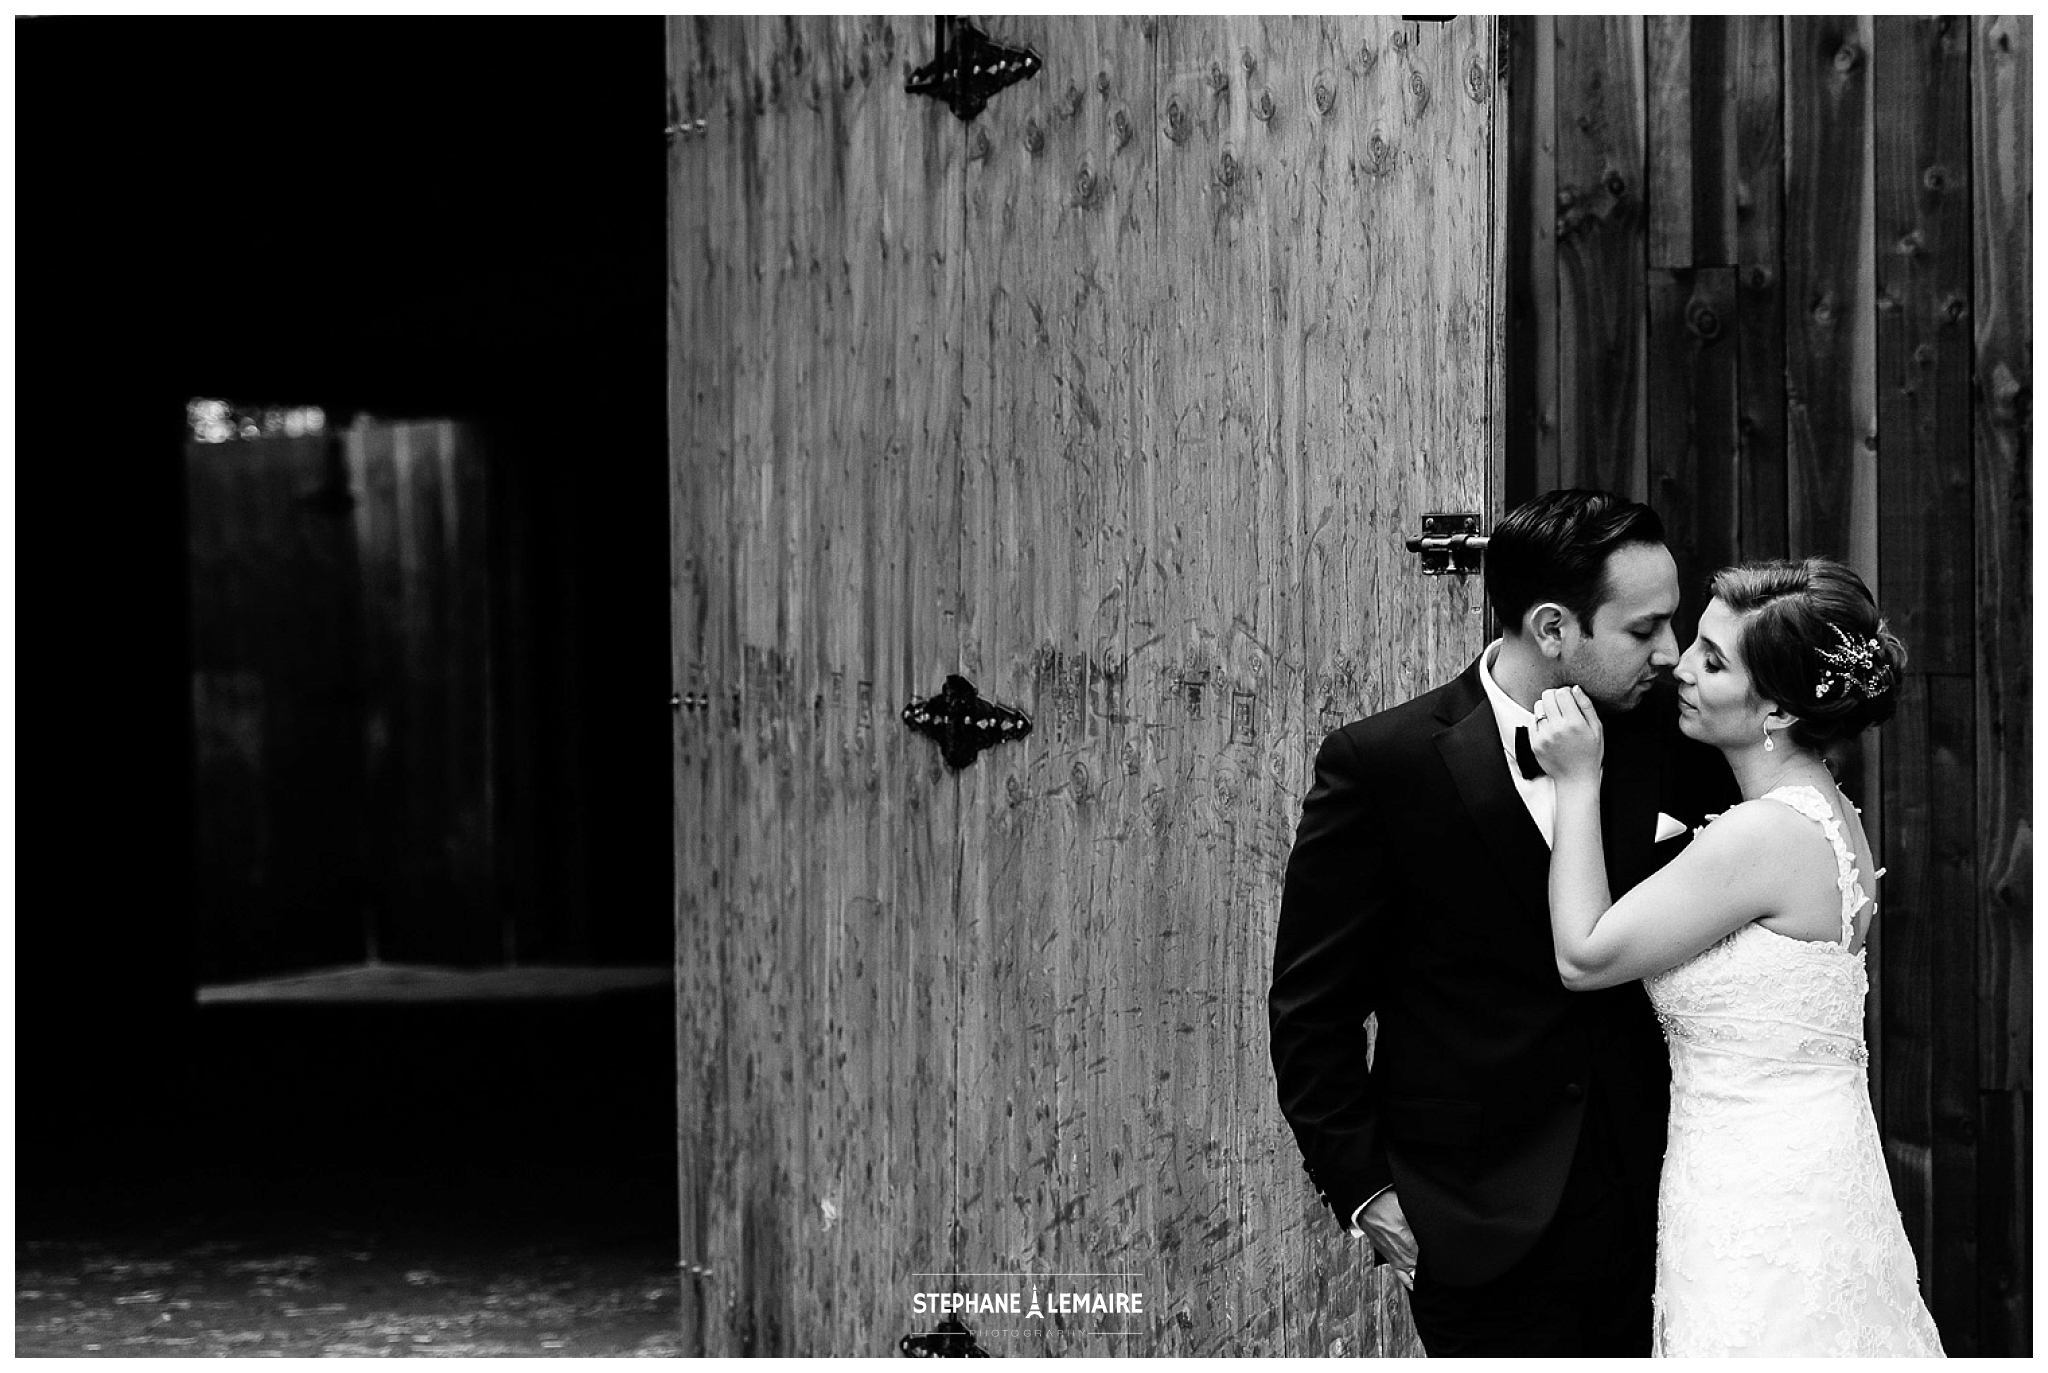 Calamigos Ranch wedding portrait by Stephane Lemaire Photography 